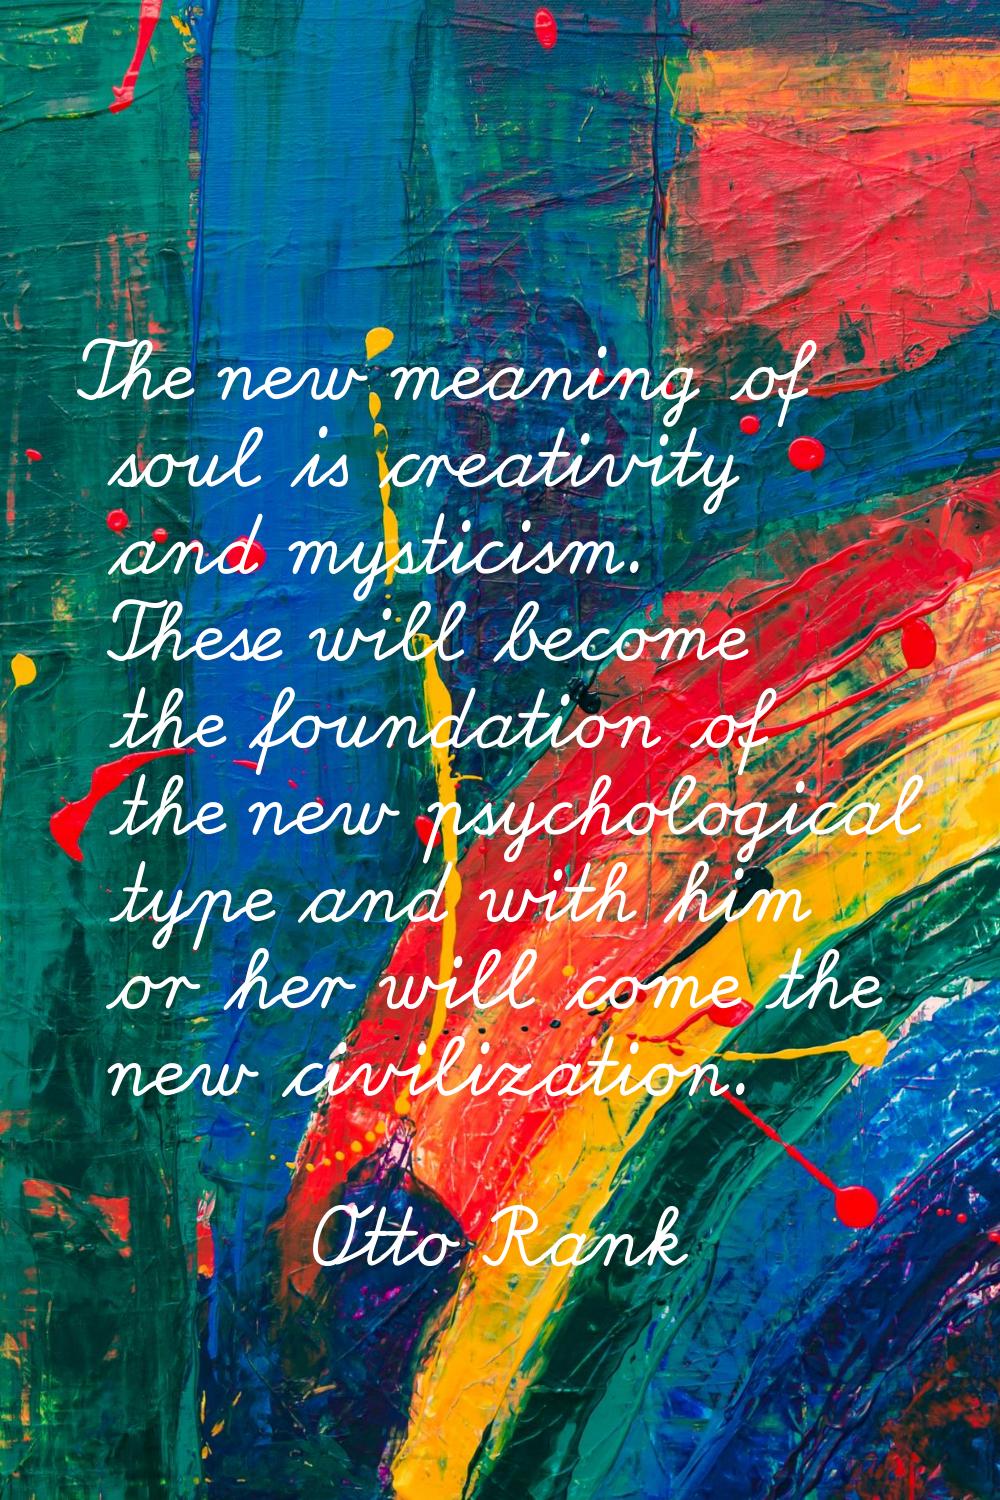 The new meaning of soul is creativity and mysticism. These will become the foundation of the new ps